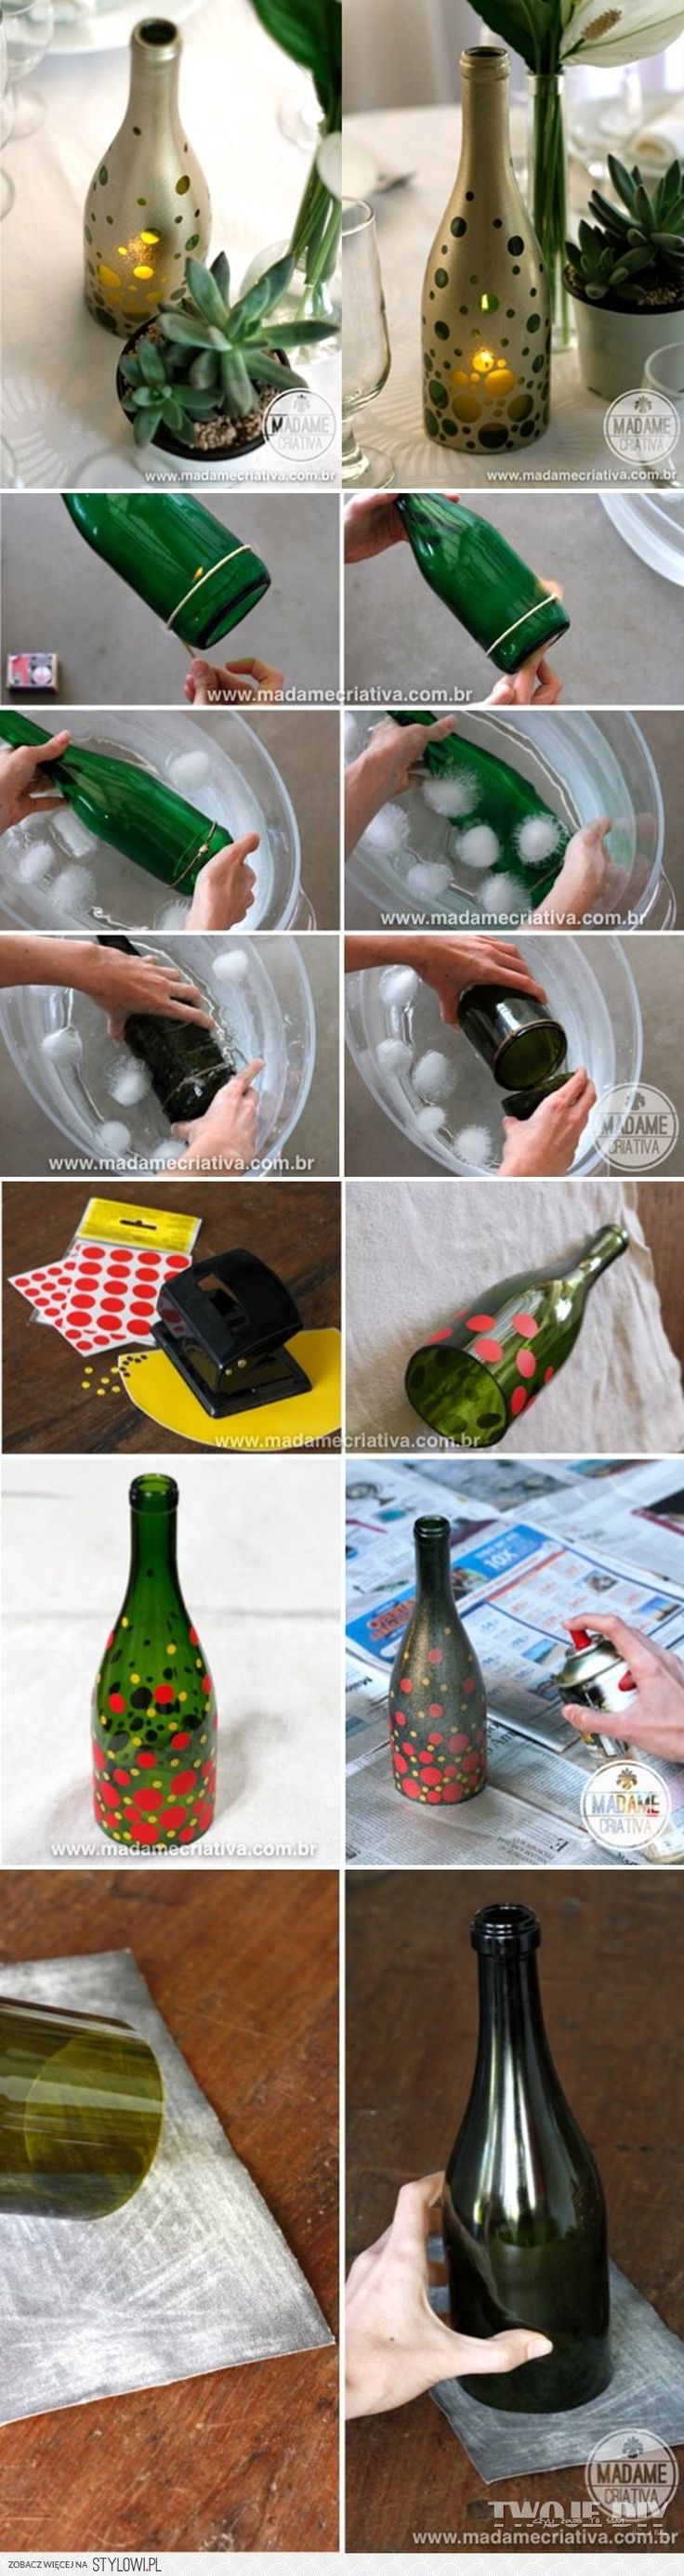 26 Wine Bottle Crafts To Surprise Your Guests Beautifully homeshetics decor (4)